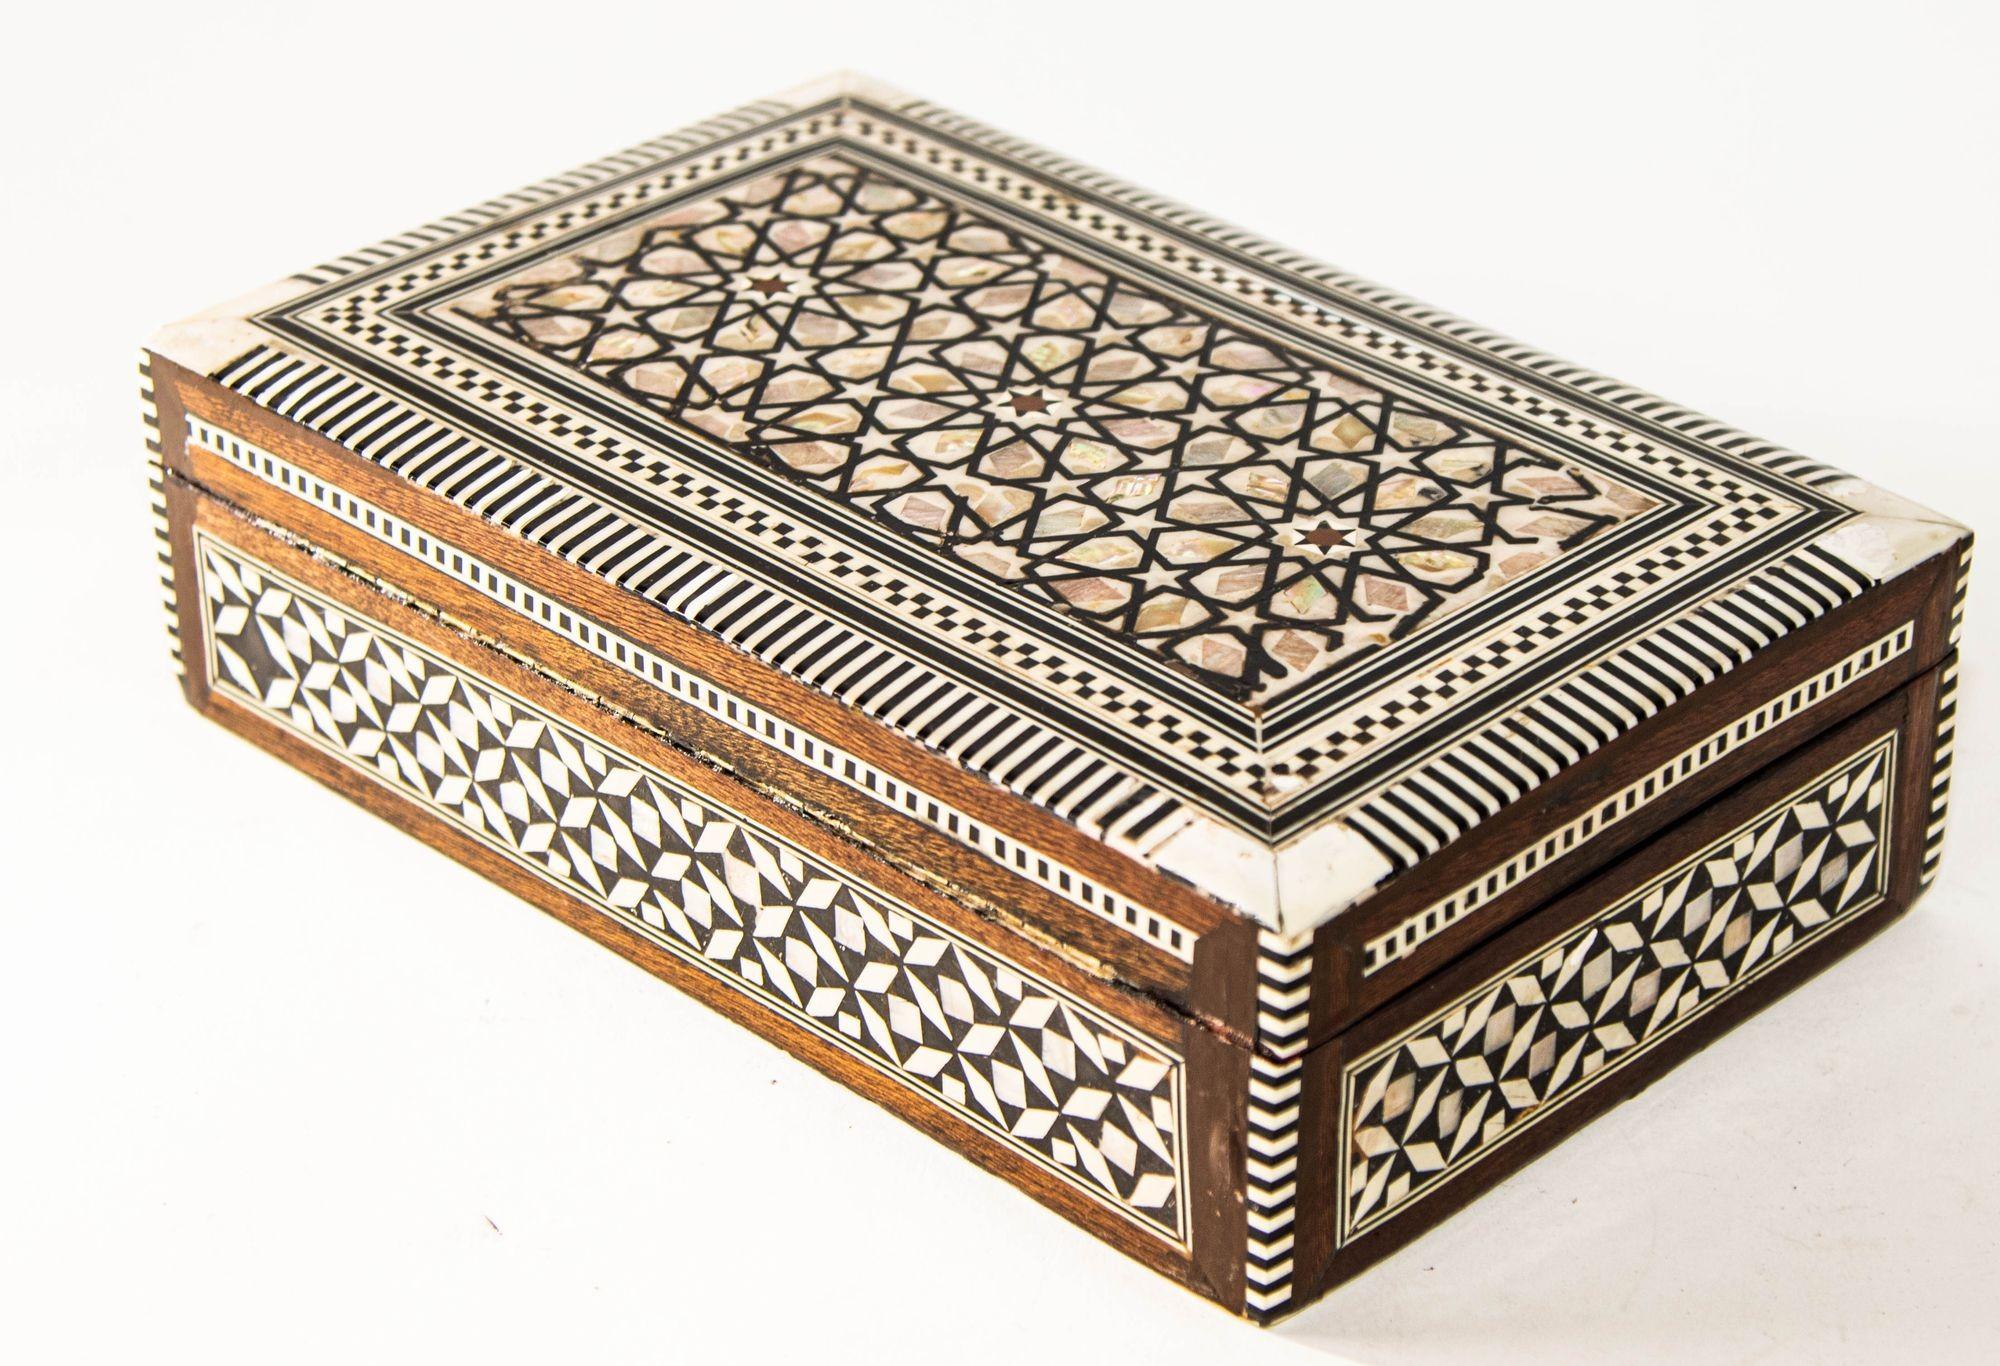 1950s Mosaic Mother of Pearl Inlaid Decorative Middle Eastern Islamic Box 2